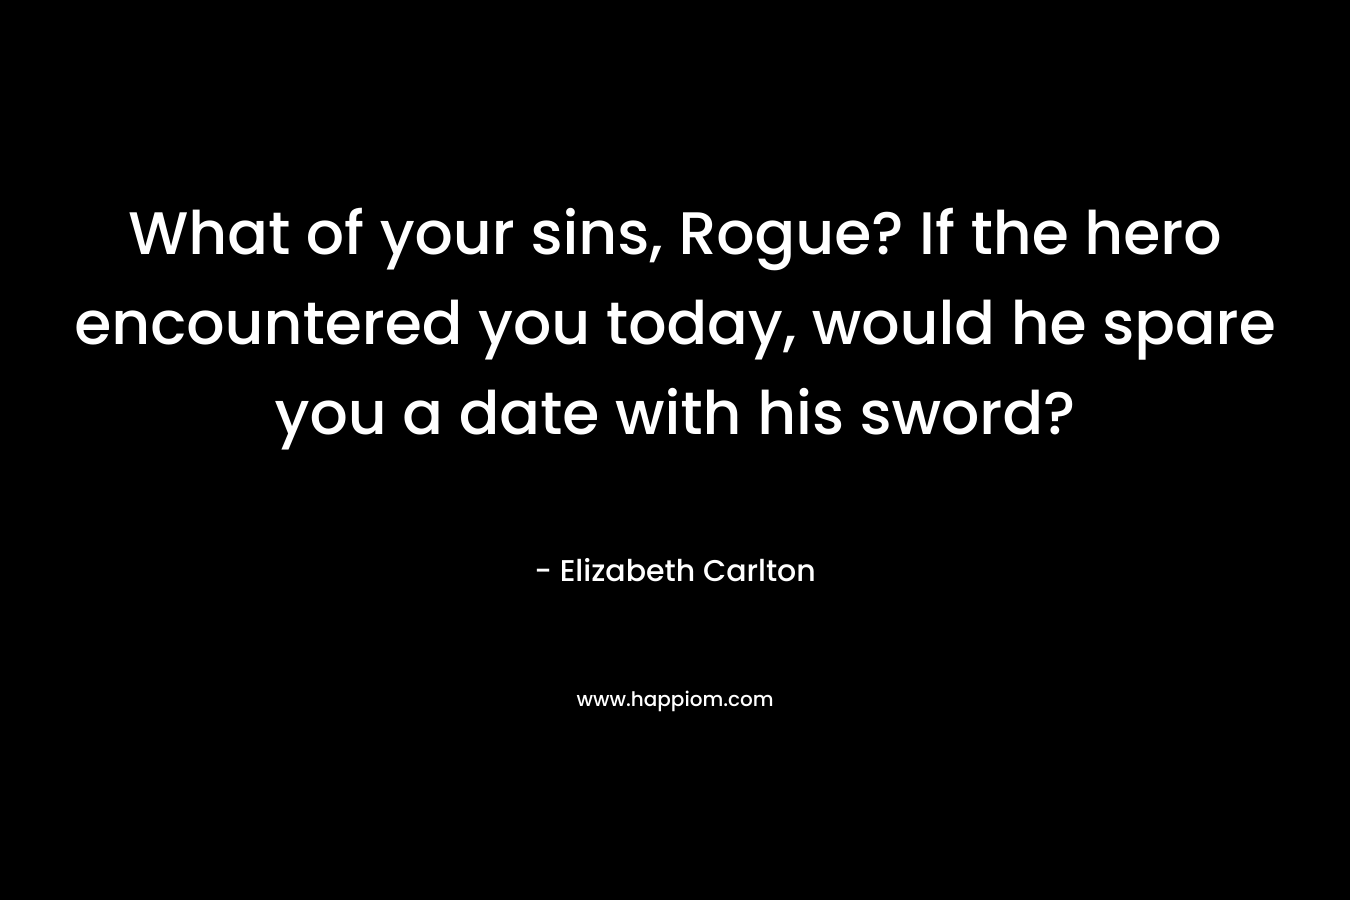 What of your sins, Rogue? If the hero encountered you today, would he spare you a date with his sword? – Elizabeth Carlton